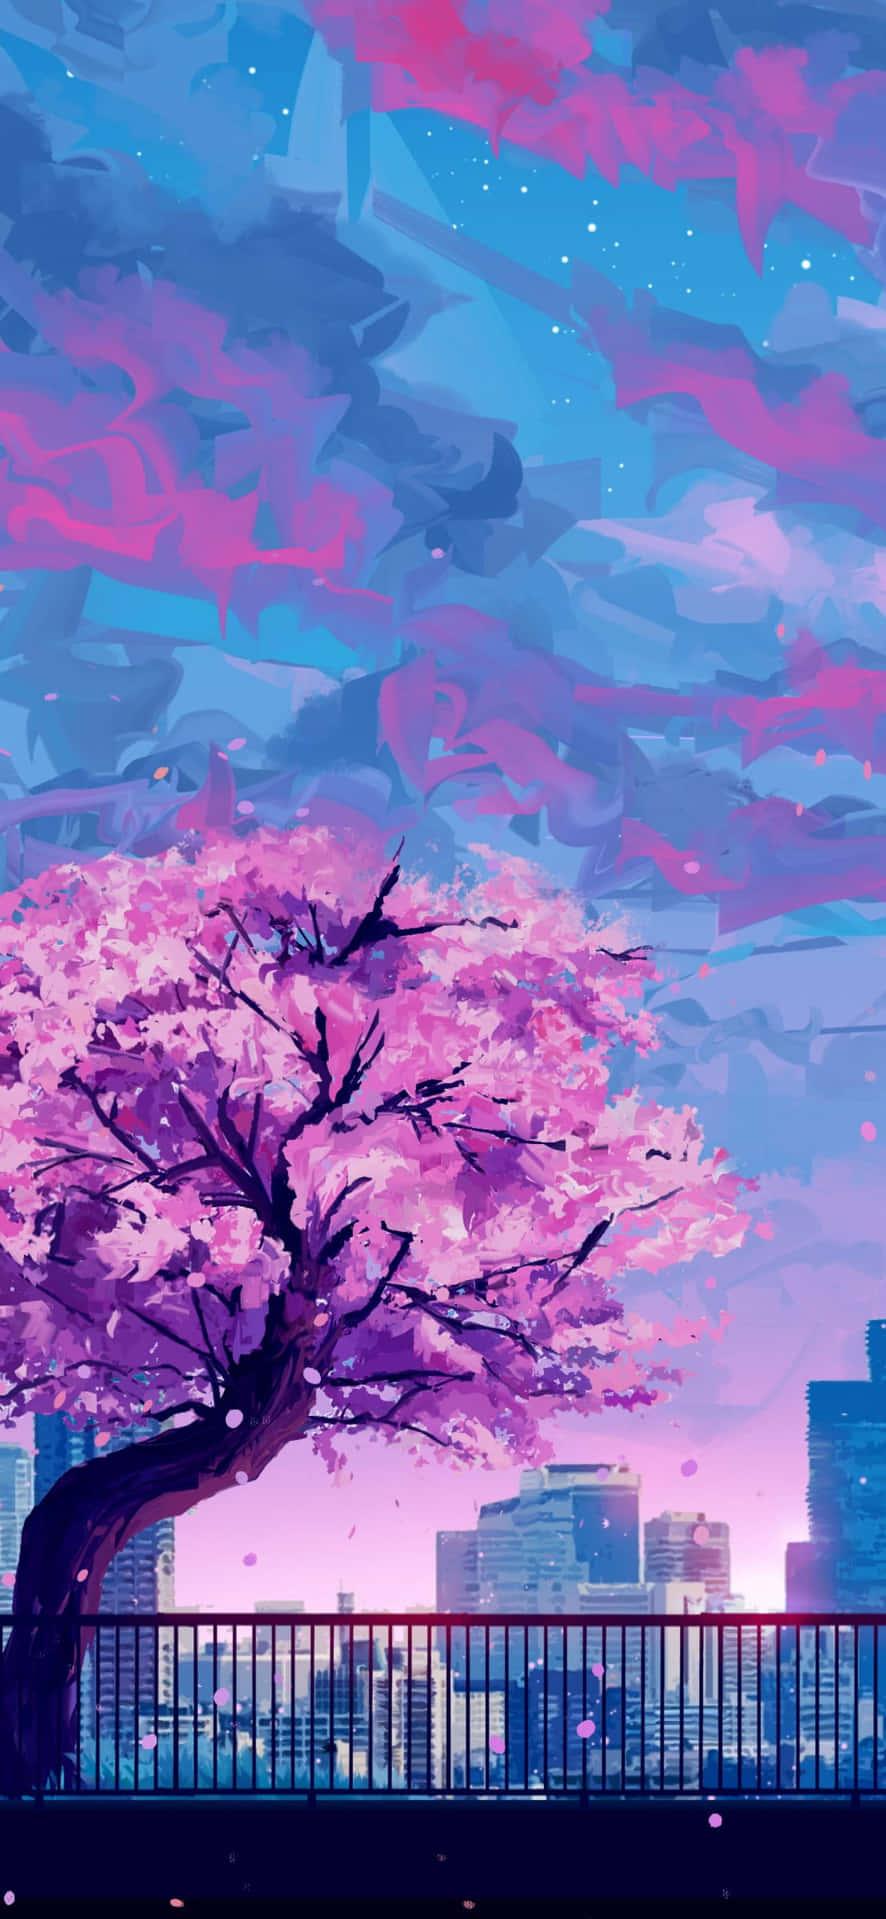 Download Cherry Blossom Tree Anime Japanese iPhone Wallpaper